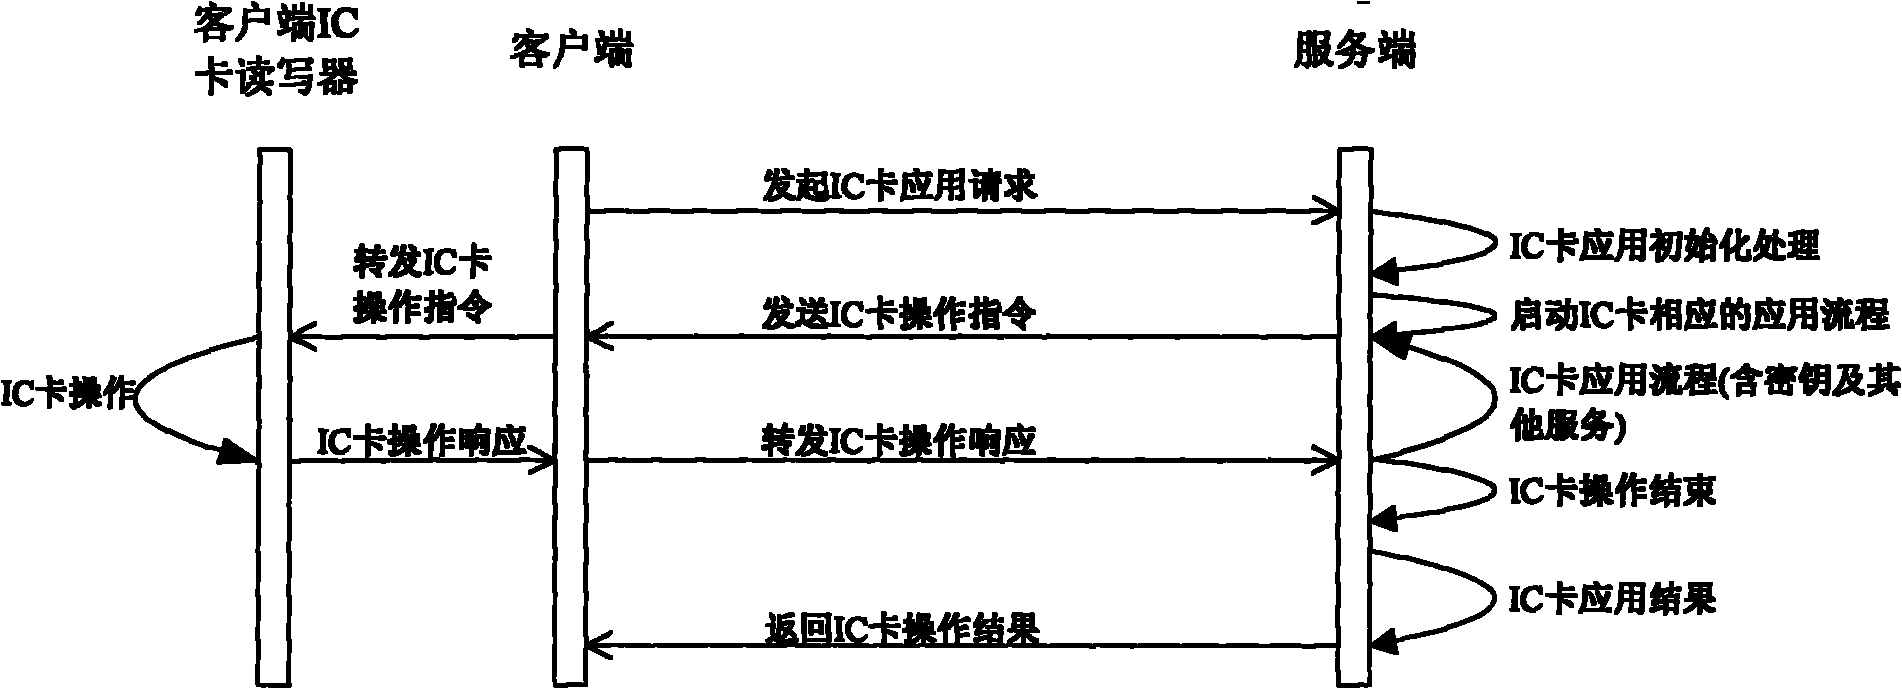 Equipment system and method for remotely operating integrated circuit (IC) card